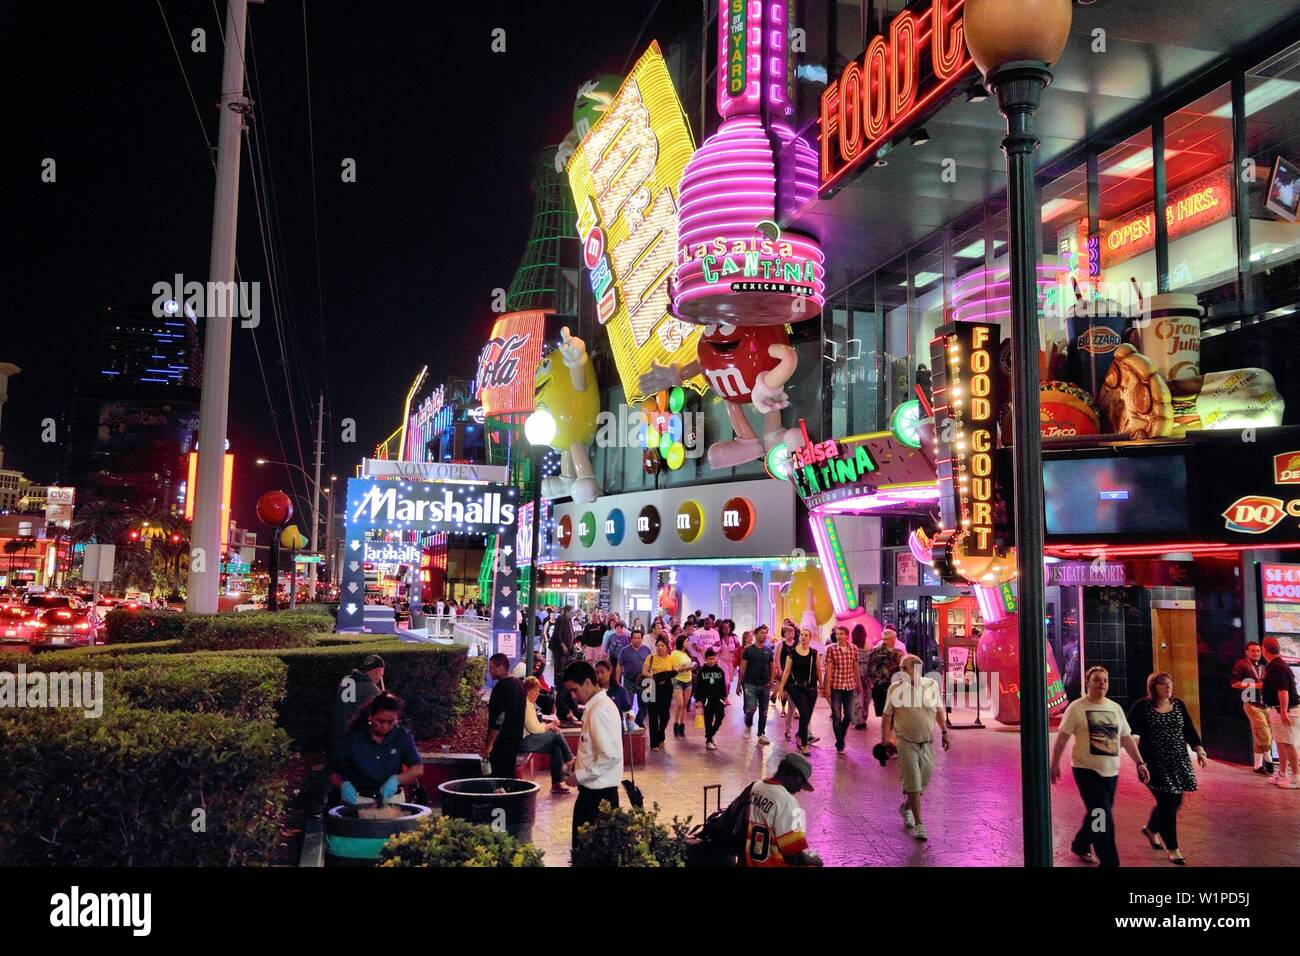 LAS VEGAS, USA - APRIL 13, 2014: People visit the famous Strip in Las Vegas. 15 of 25 largest hotels in the world are located at the strip with more t Stock Photo